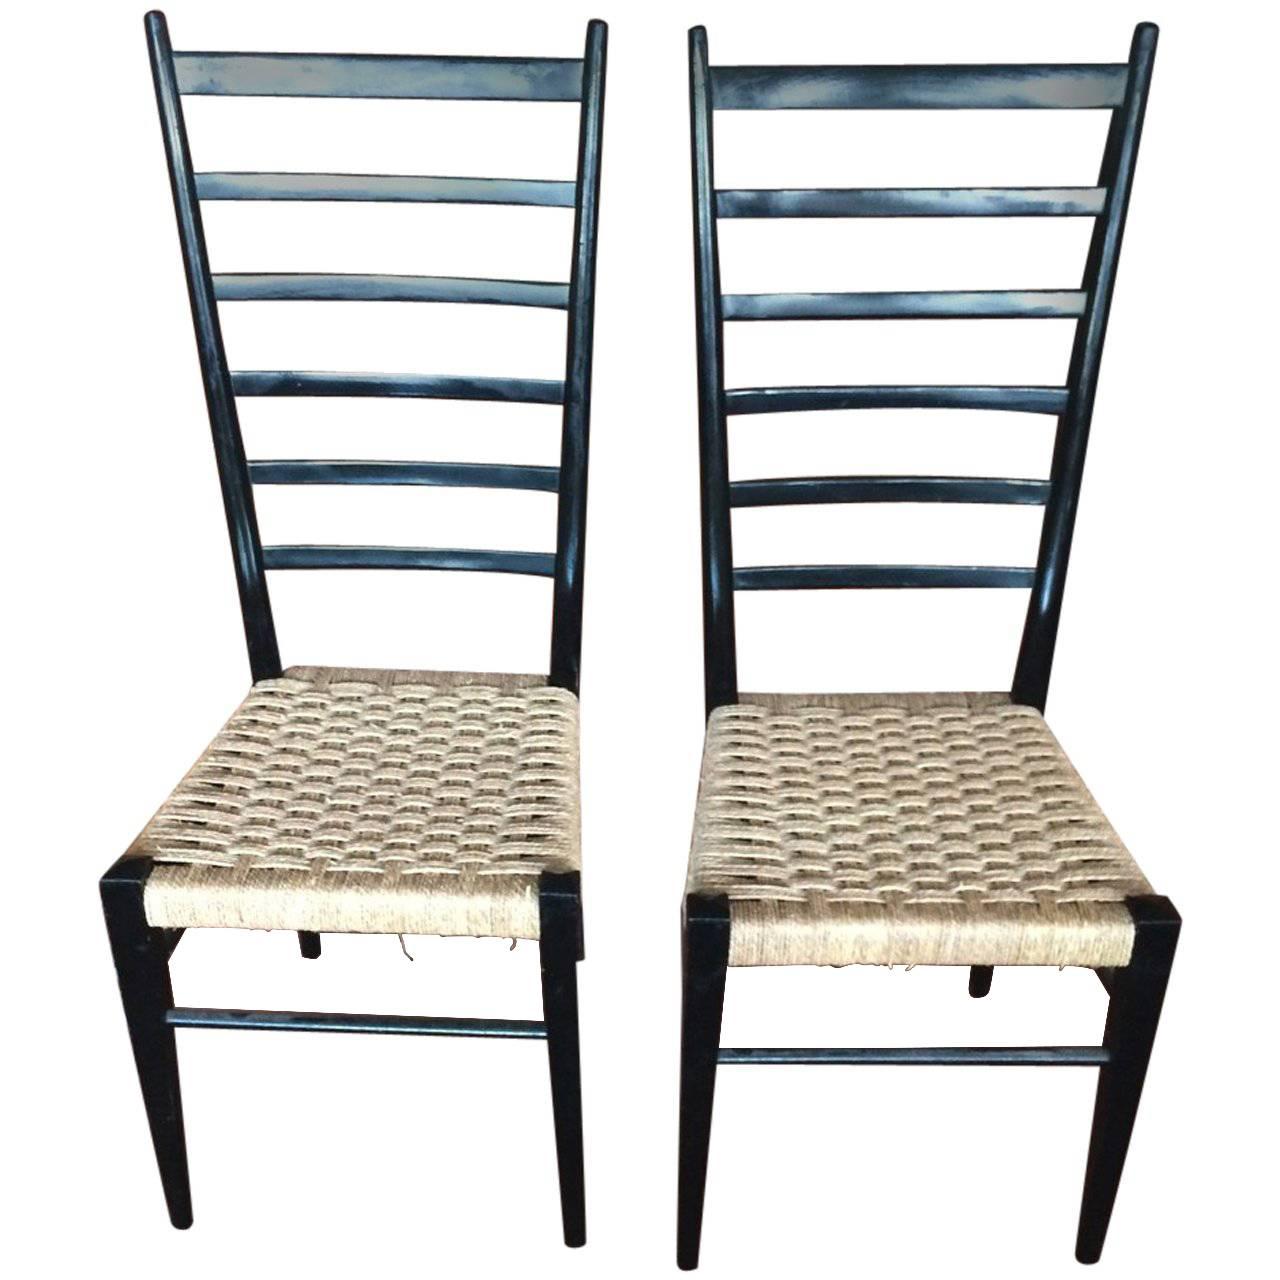 Pair of Gio Ponti High Ladder Back Chairs